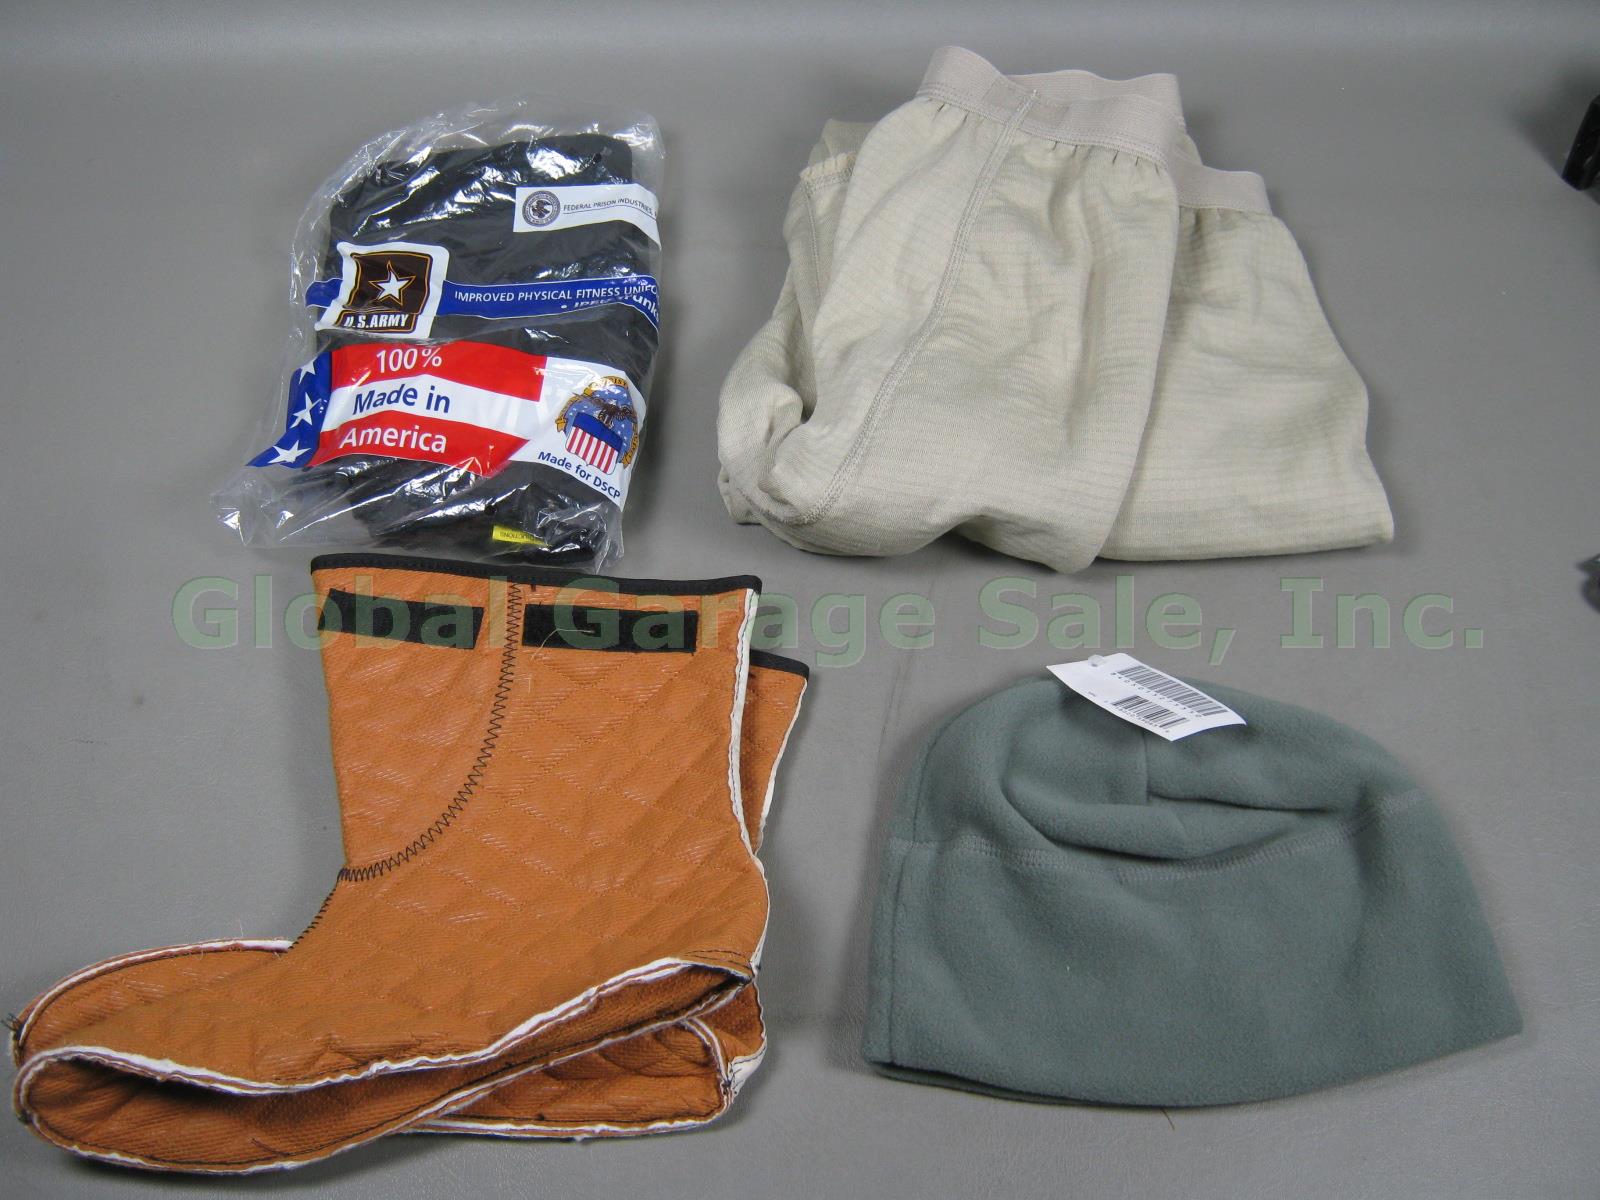 NEW Huge Military Gear Lot Rain Jacket Gloves Knee Pads Molle Load Vest Canteen 9